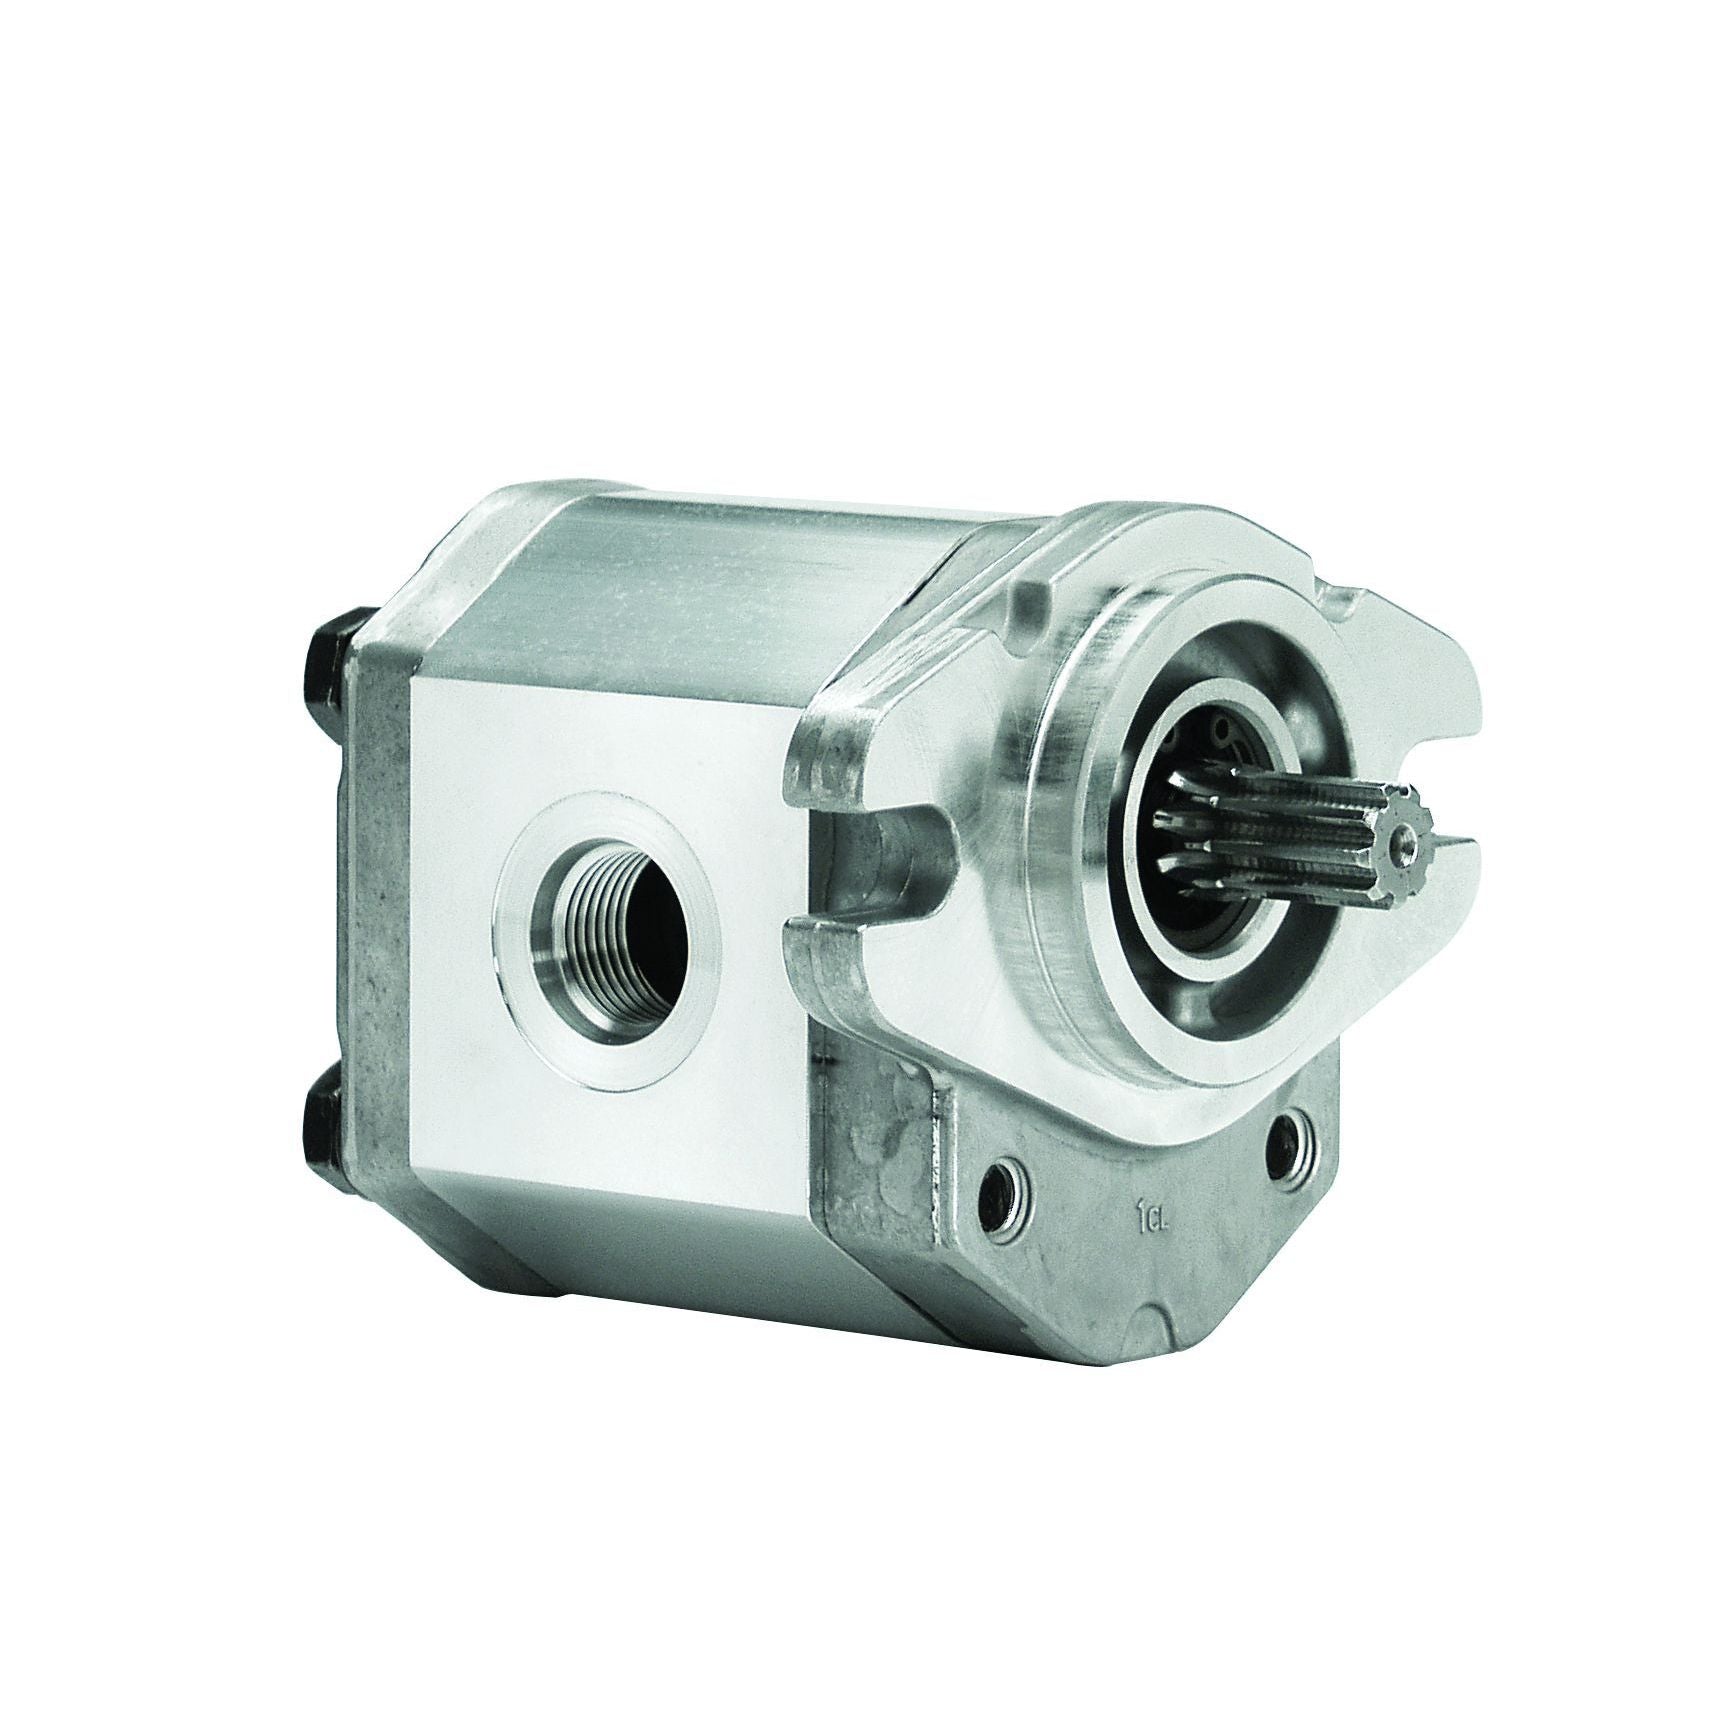 ALP2A-S-9-S1 : Marzocchi Gear Pump, CCW, 6.4cc (0.3904in3), 3.04 GPM, 3625psi, 4000 RPM, #12 SAE (3/4") In, #10 SAE (5/8") Out, Splined Shaft 9T 16/32DP, SAE A 2-Bolt Mount